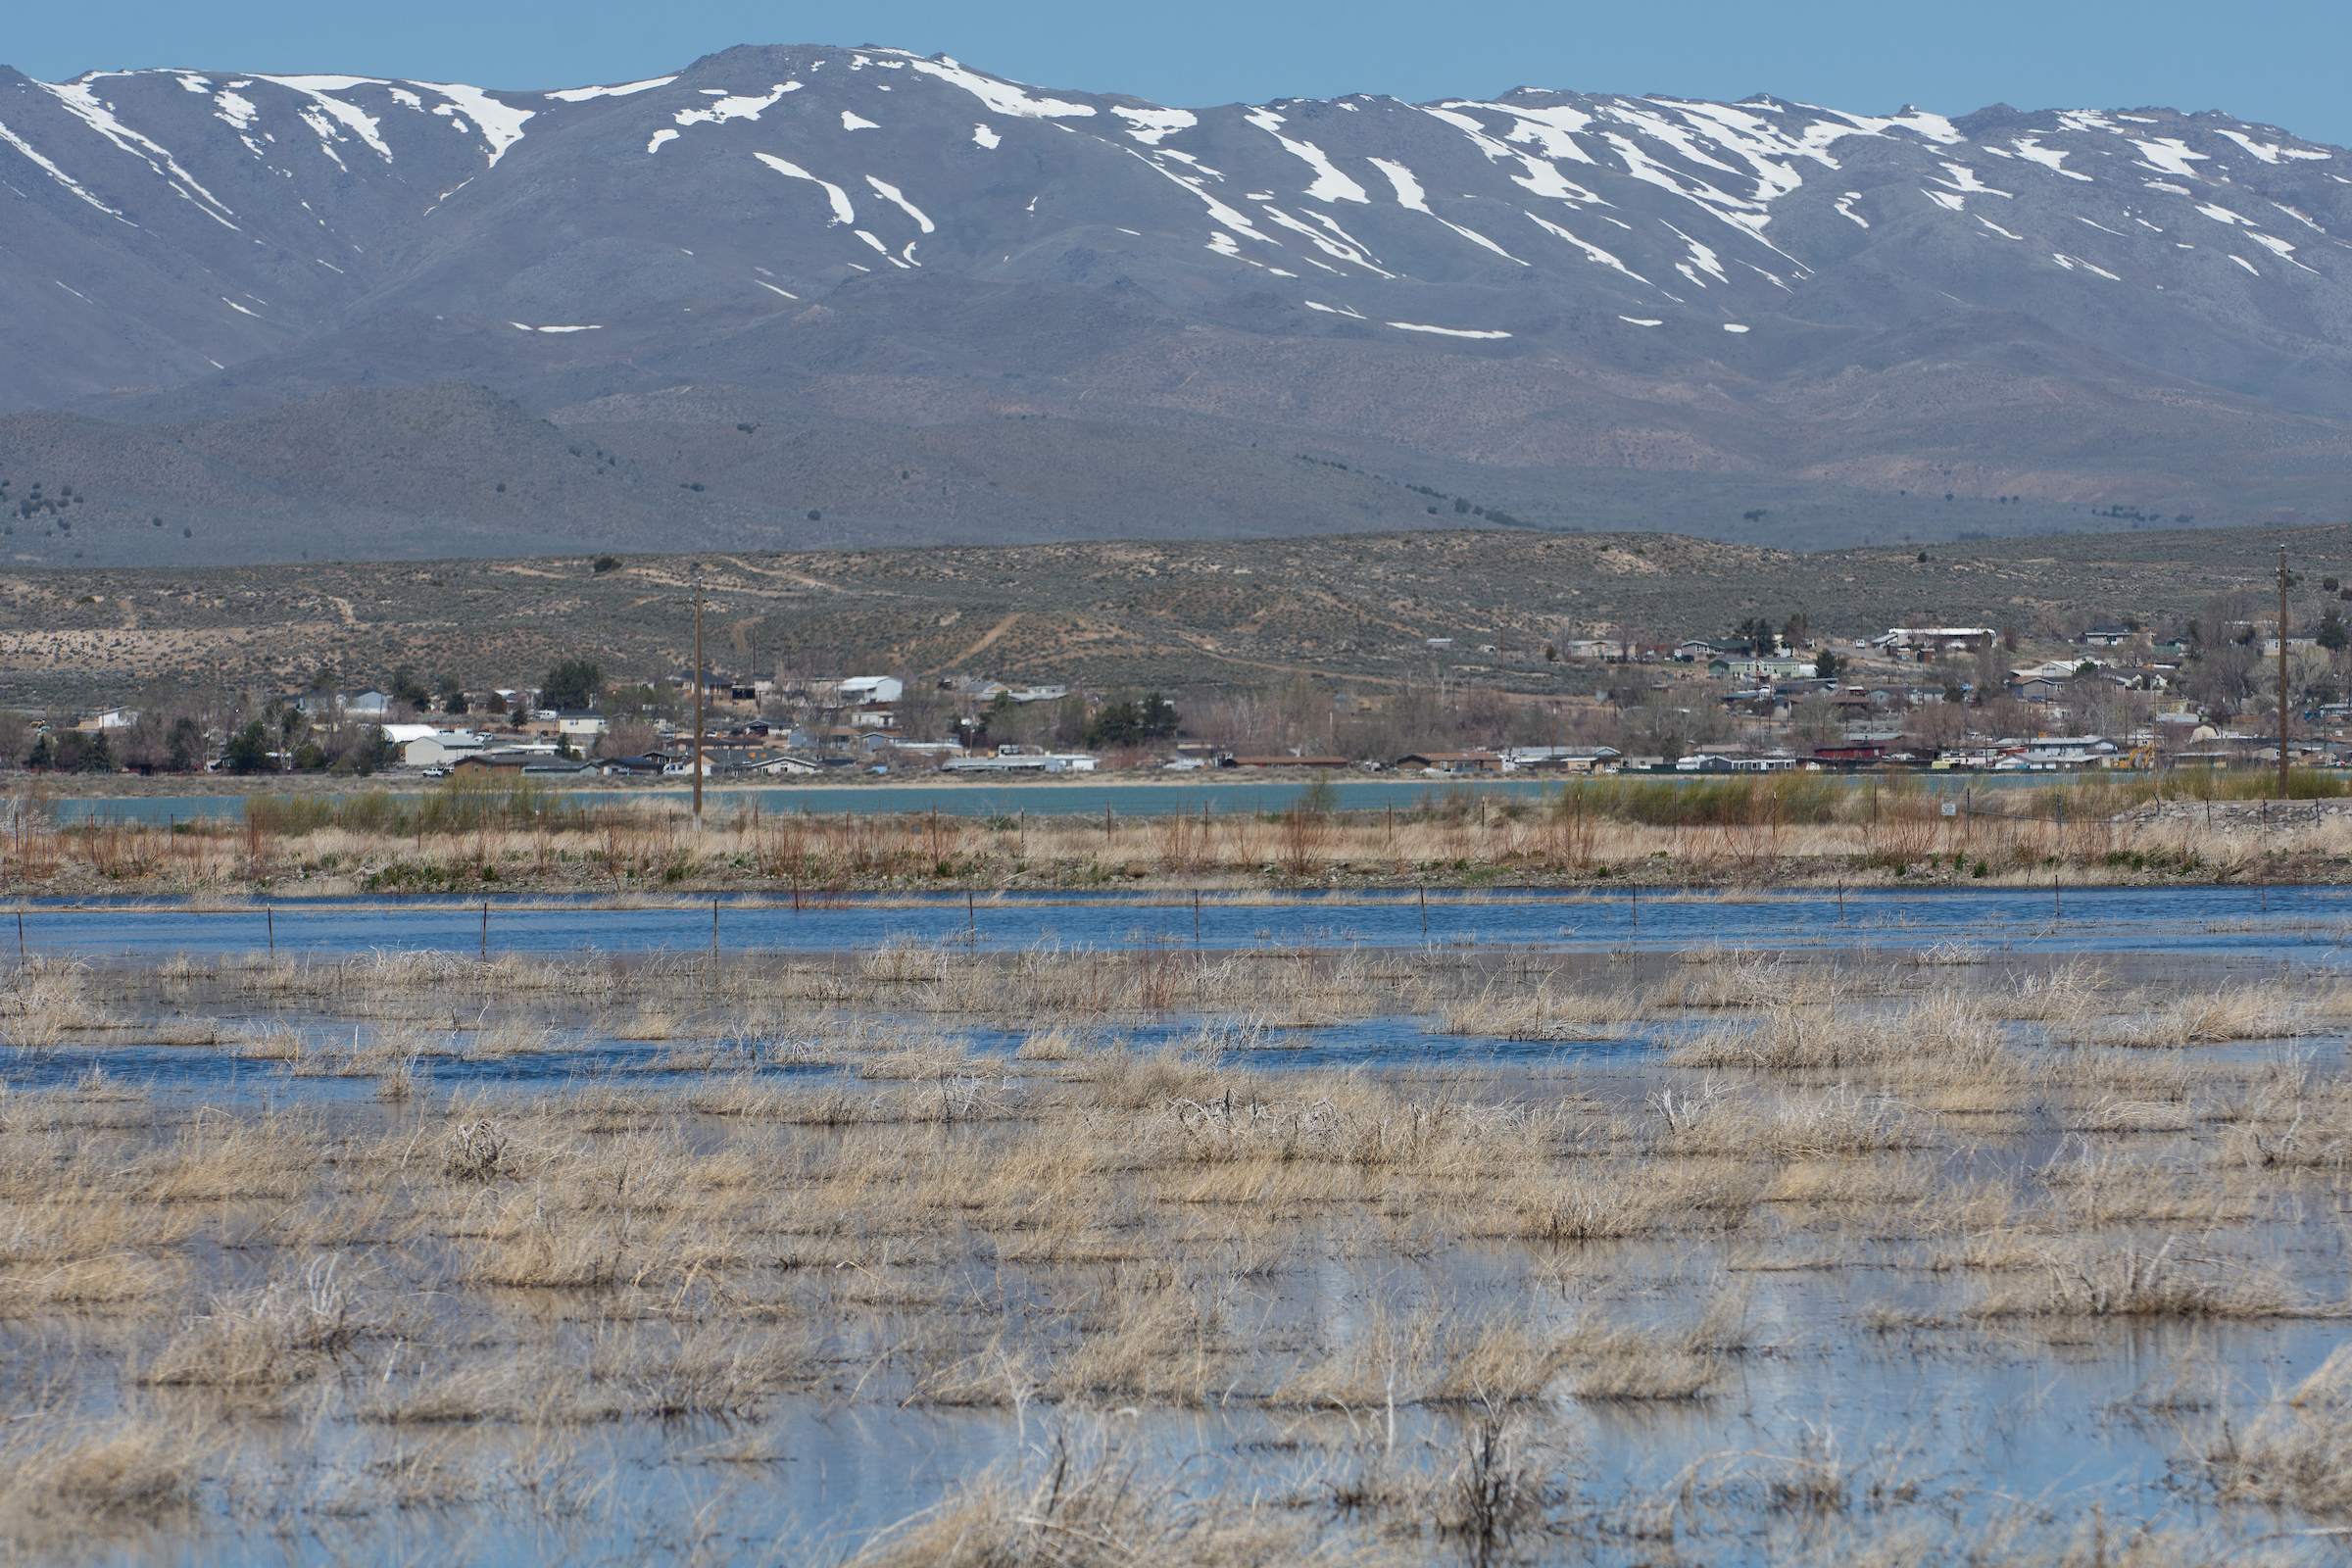 A sample collected by researchers found elevated levels of PFAS in Swan Lake, north of downtown Reno. (David Calvert/The Nevada Independent).